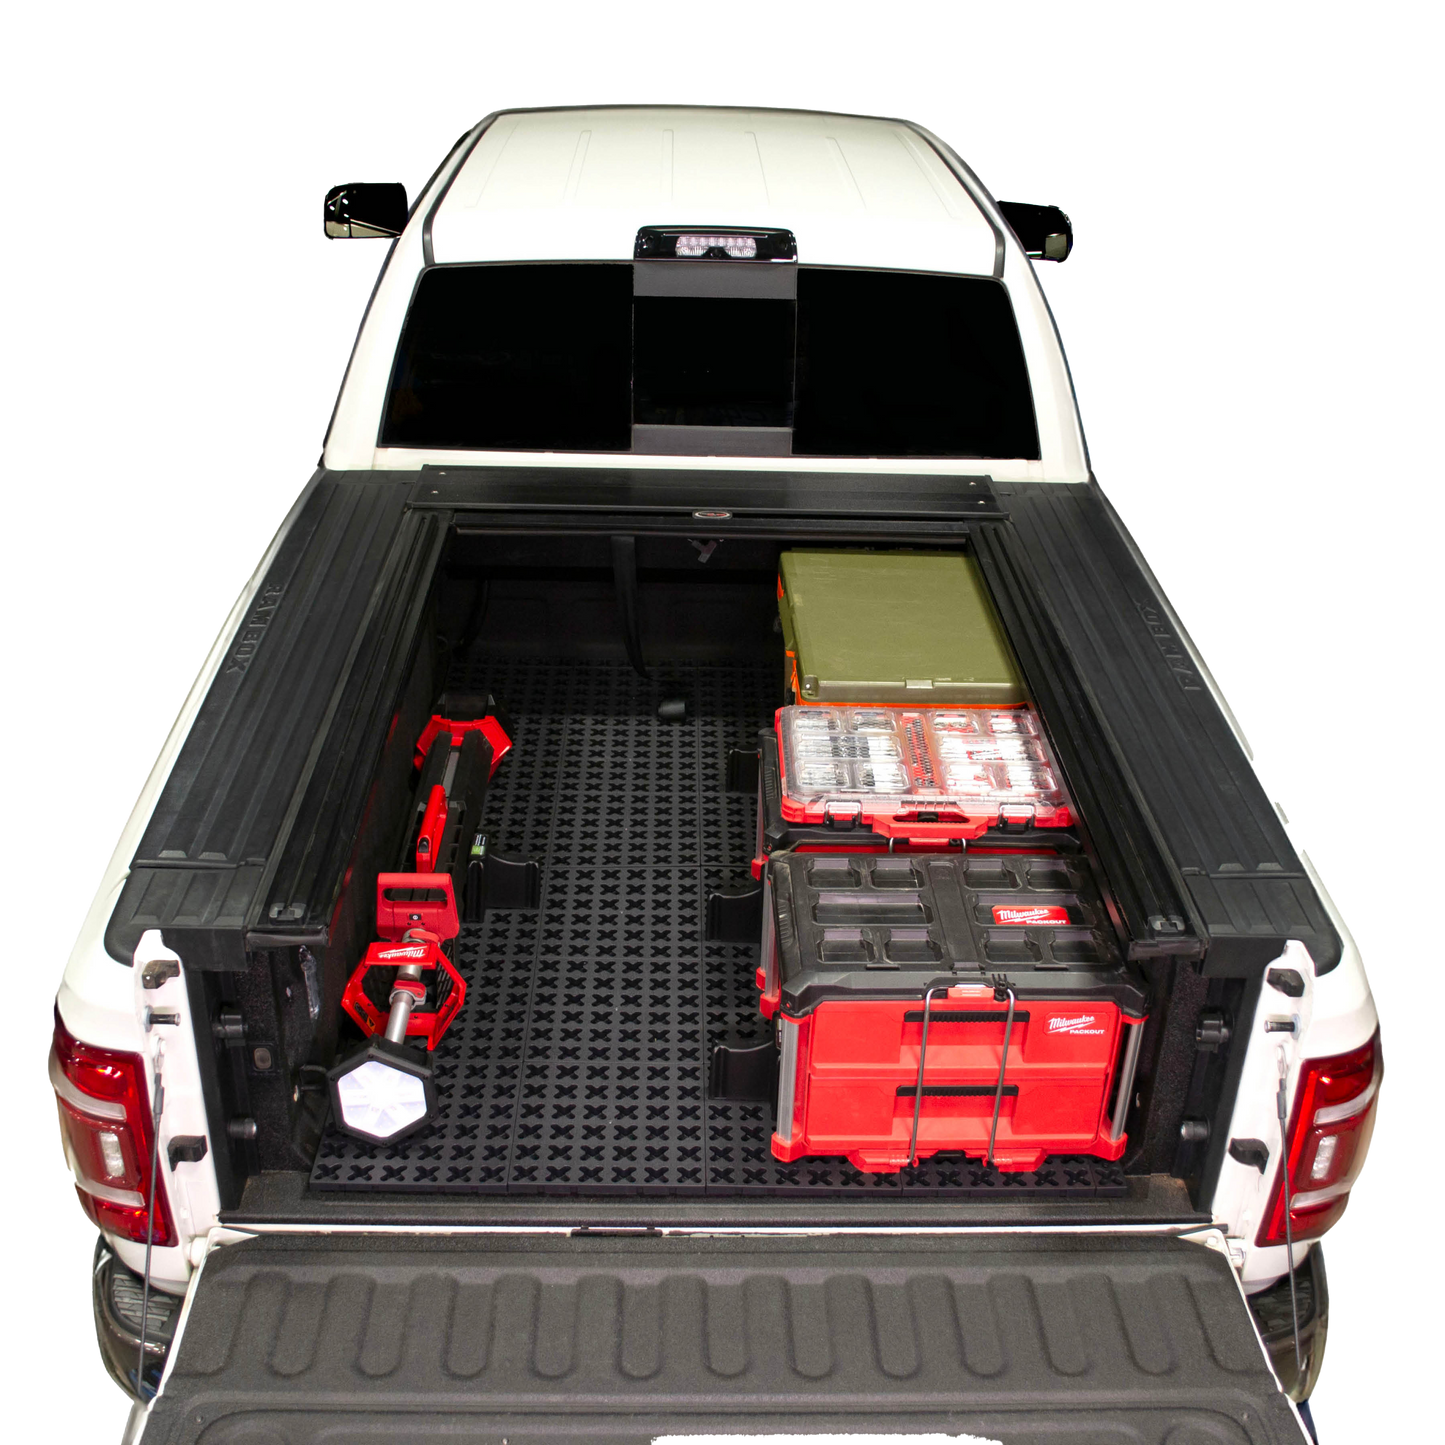 Tmat Truck Bed Mat & Cargo Management System (Long Bed 8' to 8'2")